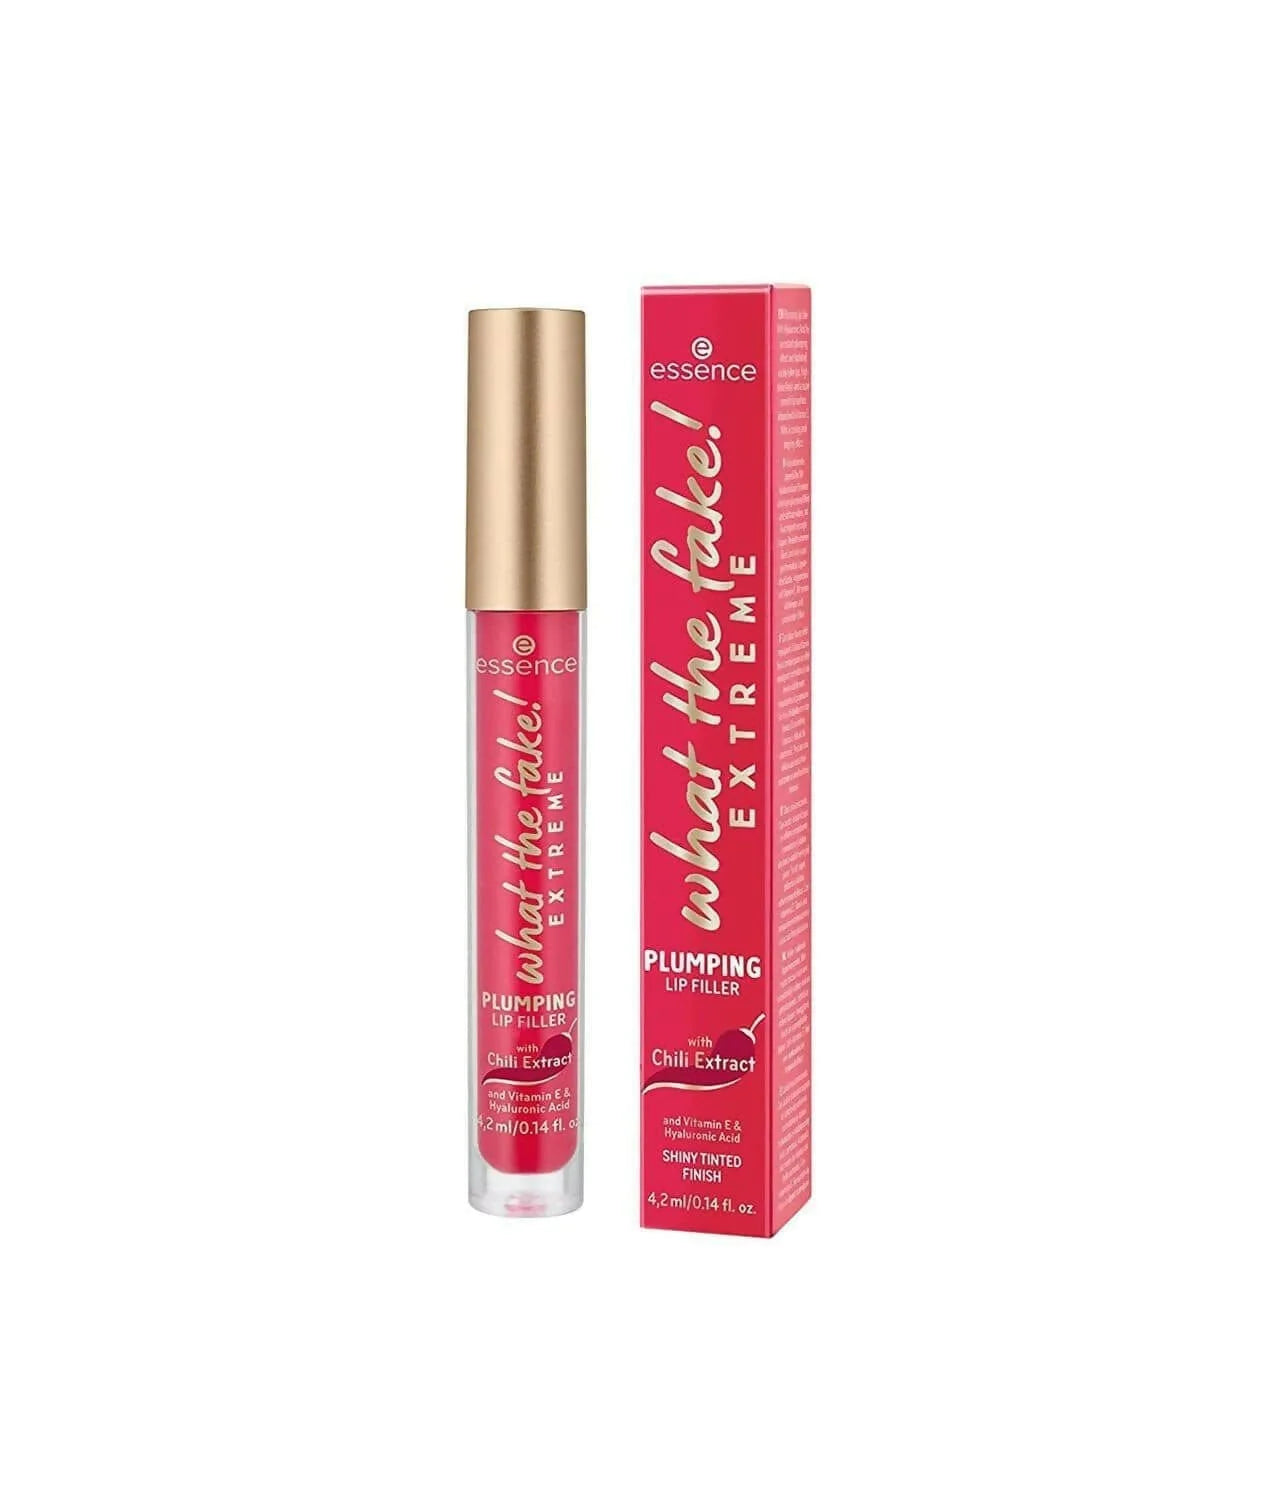 Essence What The Fake Extreme Plumping Lip Filler 4.2 ml, Red